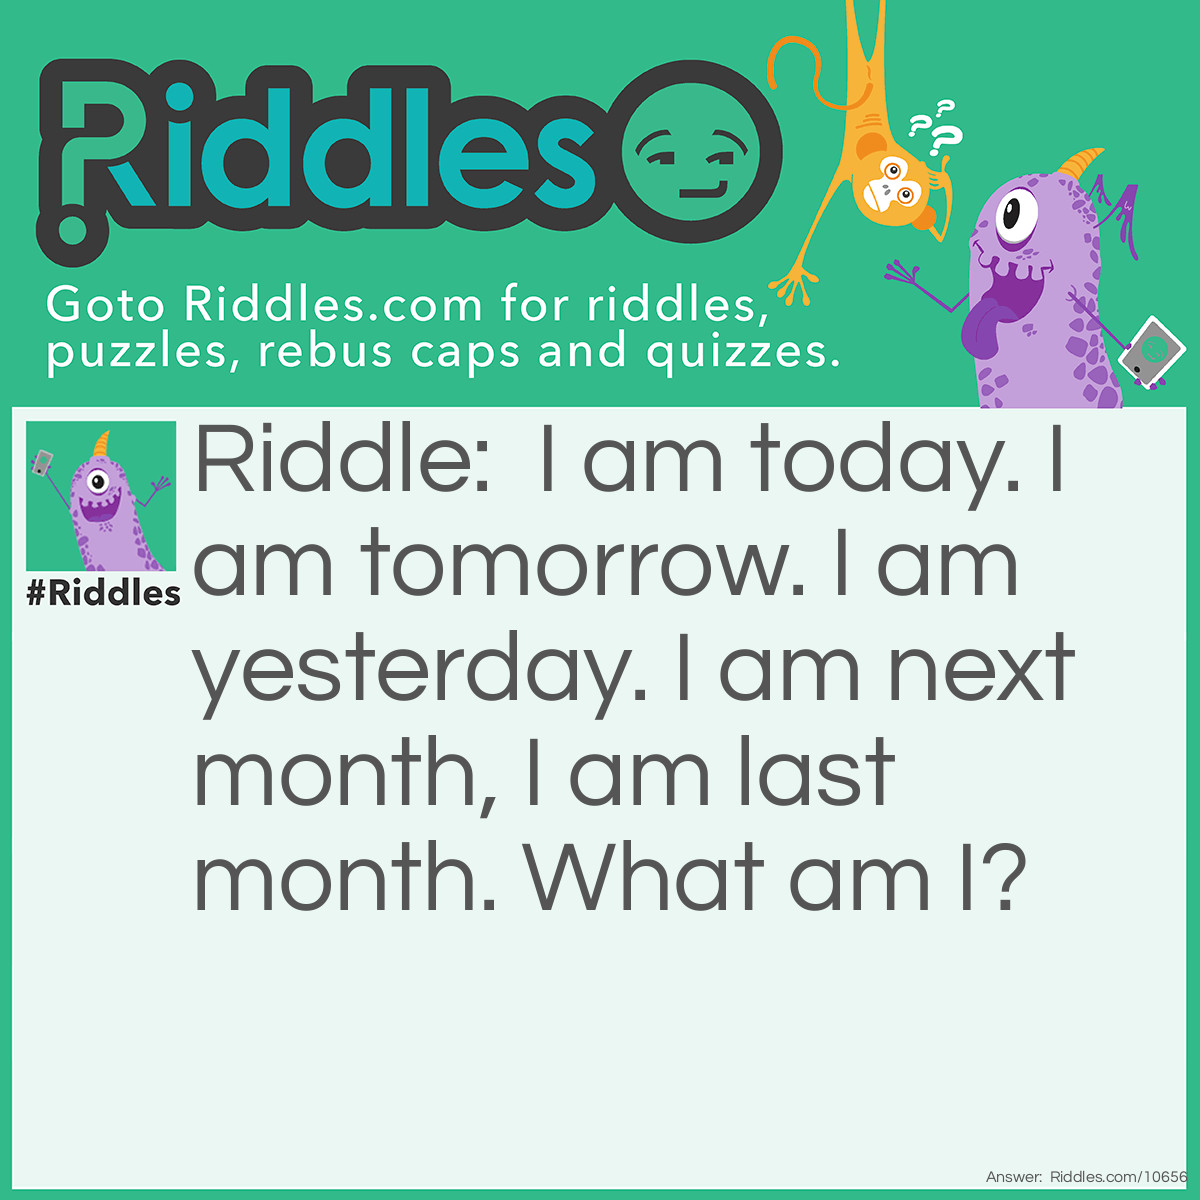 Riddle: I am today. I am tomorrow. I am yesterday. I am next month, I am last month. What am I? Answer: Time.